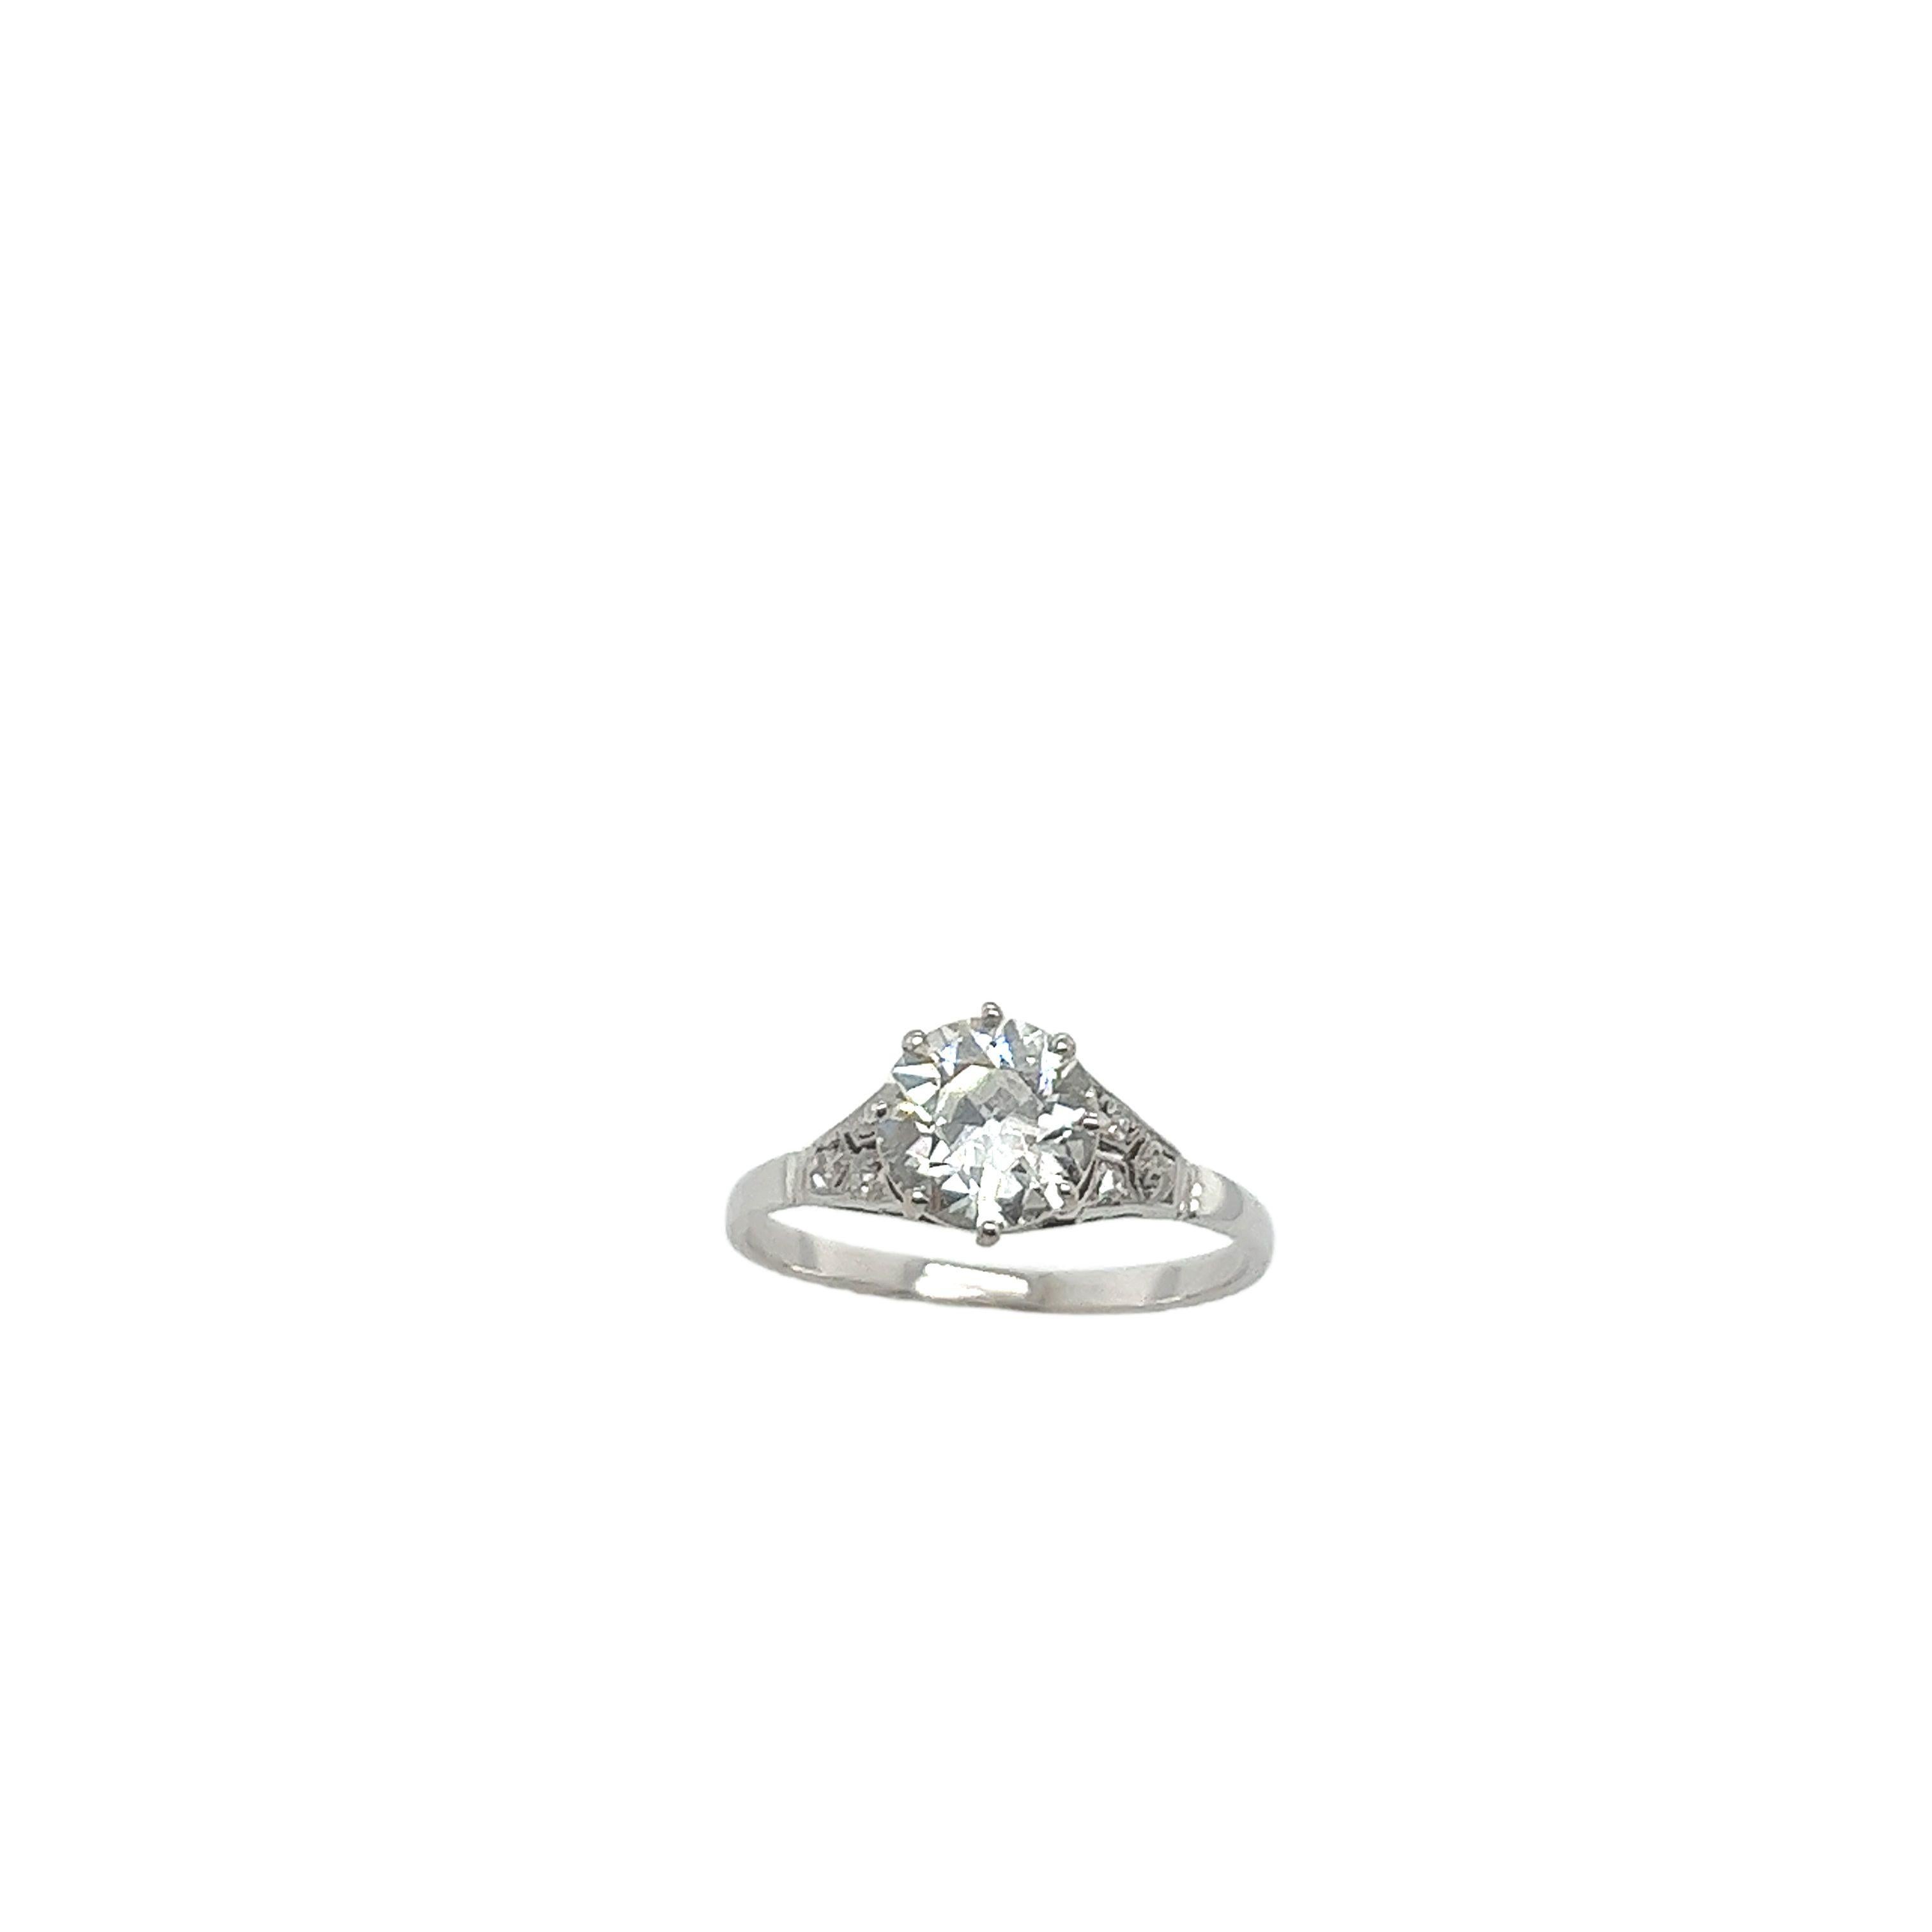 
This vintage diamond ring features 1 beautiful round old cut diamond 1.63ct set with 3 small diamonds on each side.
The 18ct white gold setting is both timeless and classic and completes the overall look of this gorgeous set.

Total Diamond Weight: